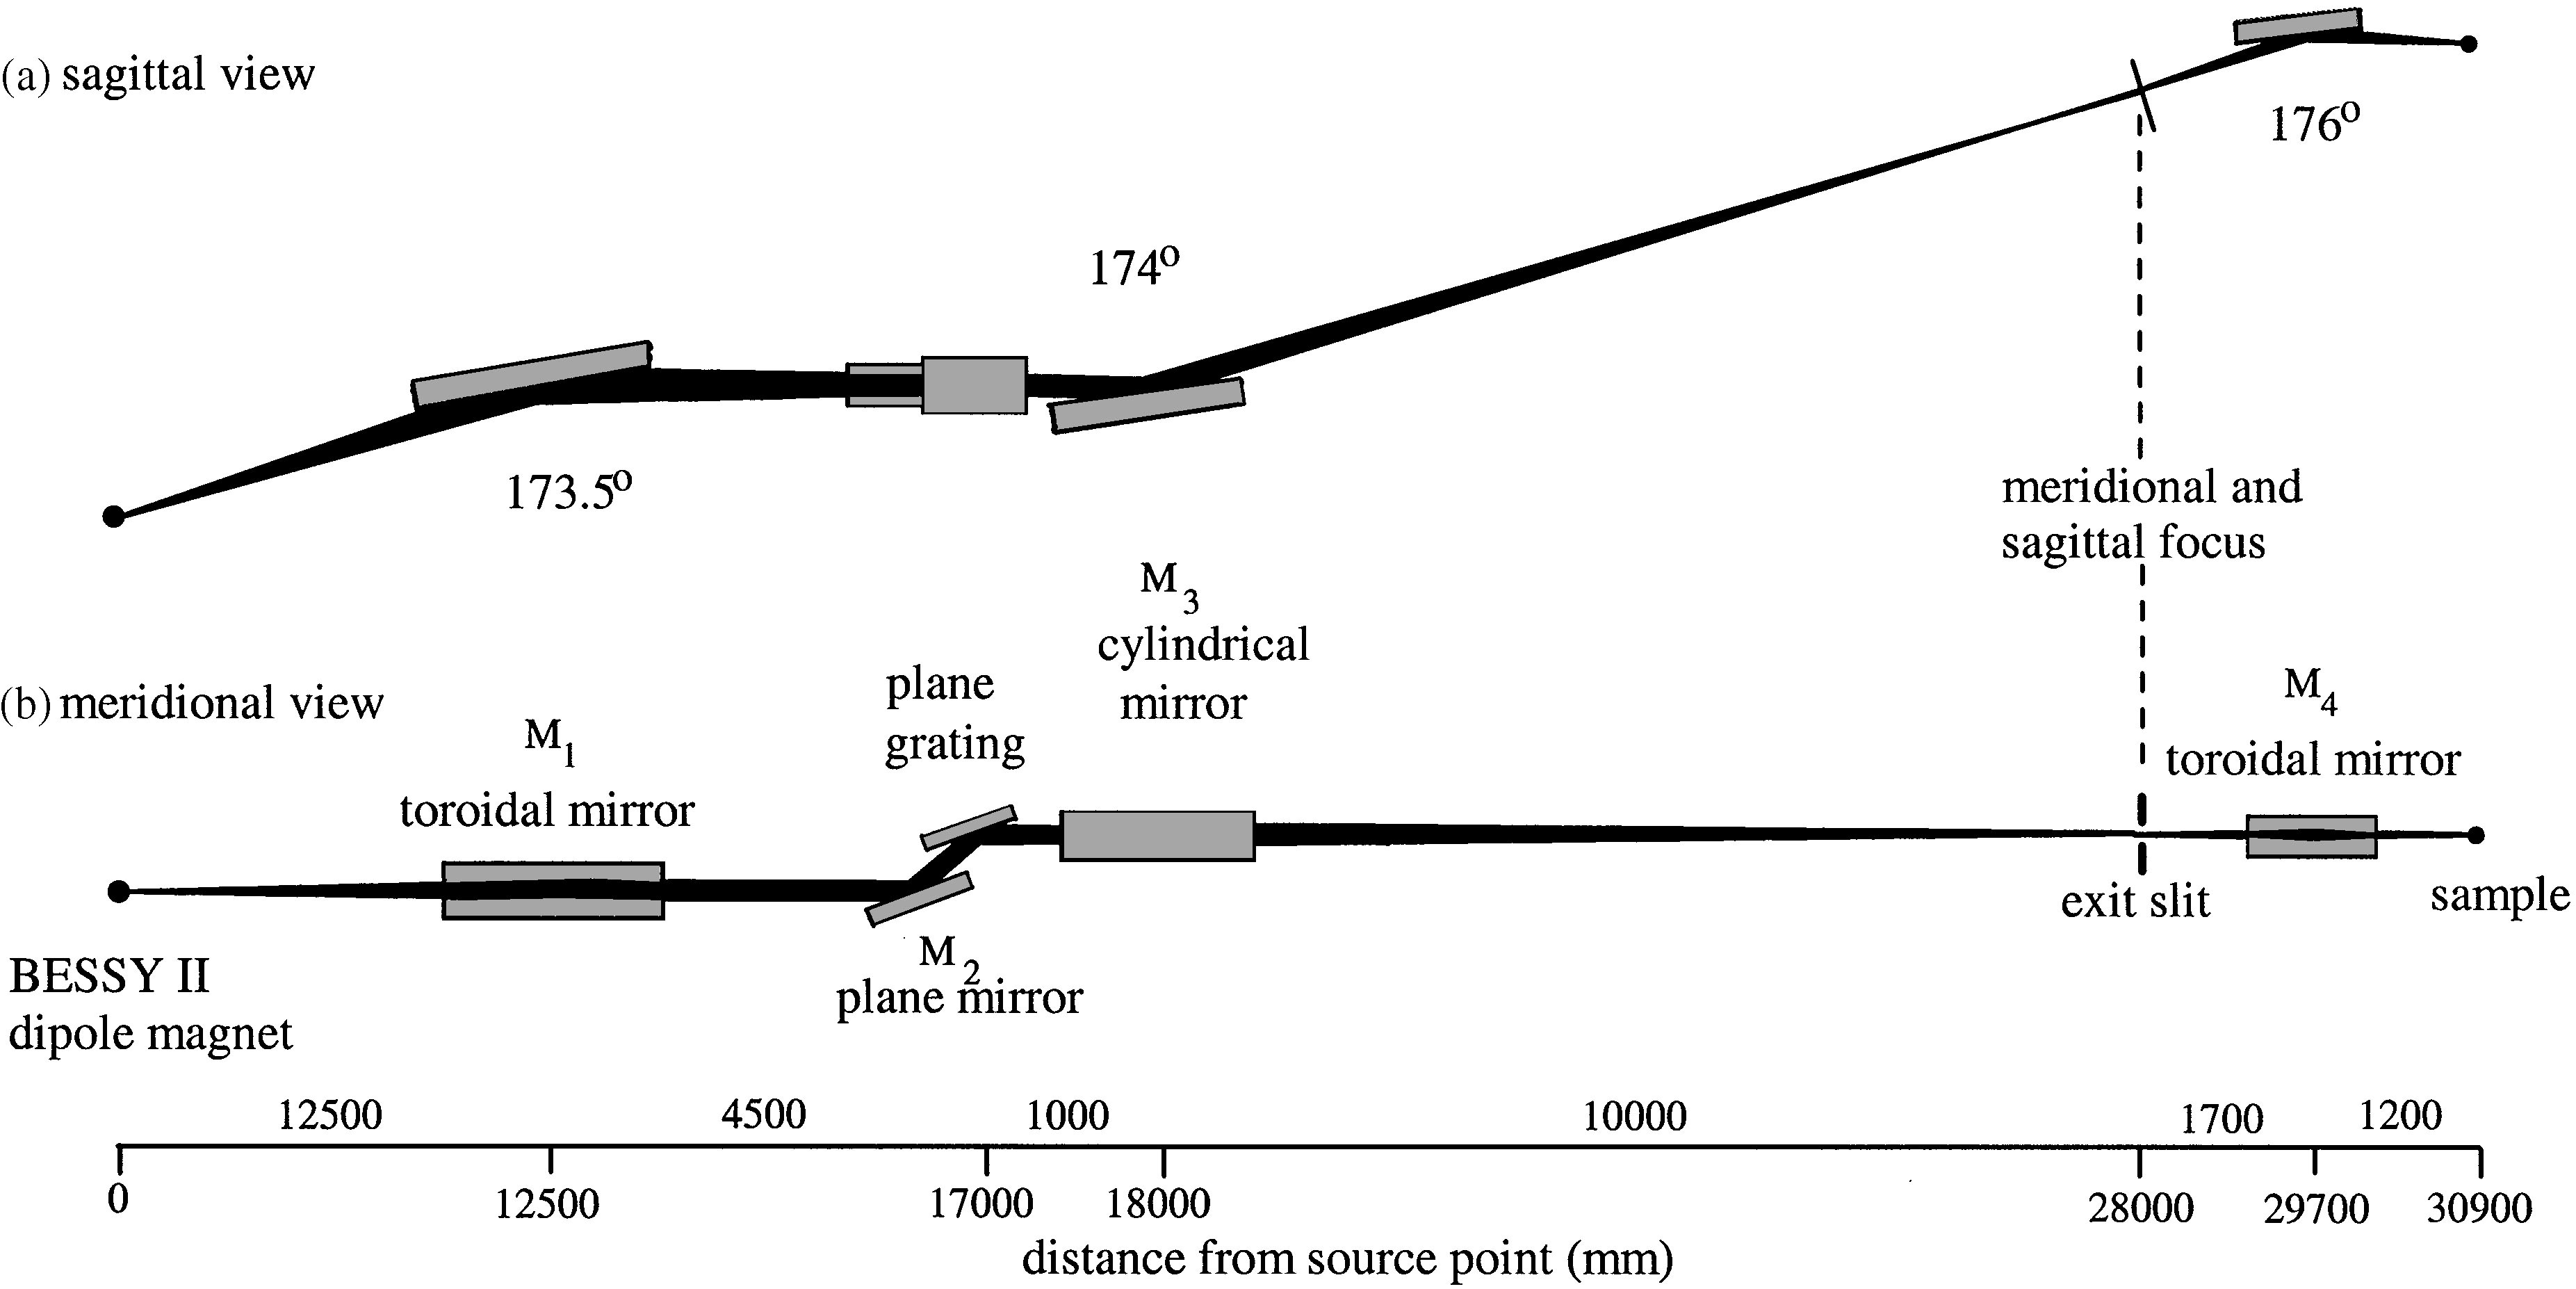 Optical layout of the RGBL dipole Beamline. [Gorovikov et al., Nucl. Instrum. Methods Phys. Res. A: Accel. Spectrom. Detect. Assoc. Equip. 467–468 (2001) 565-568]